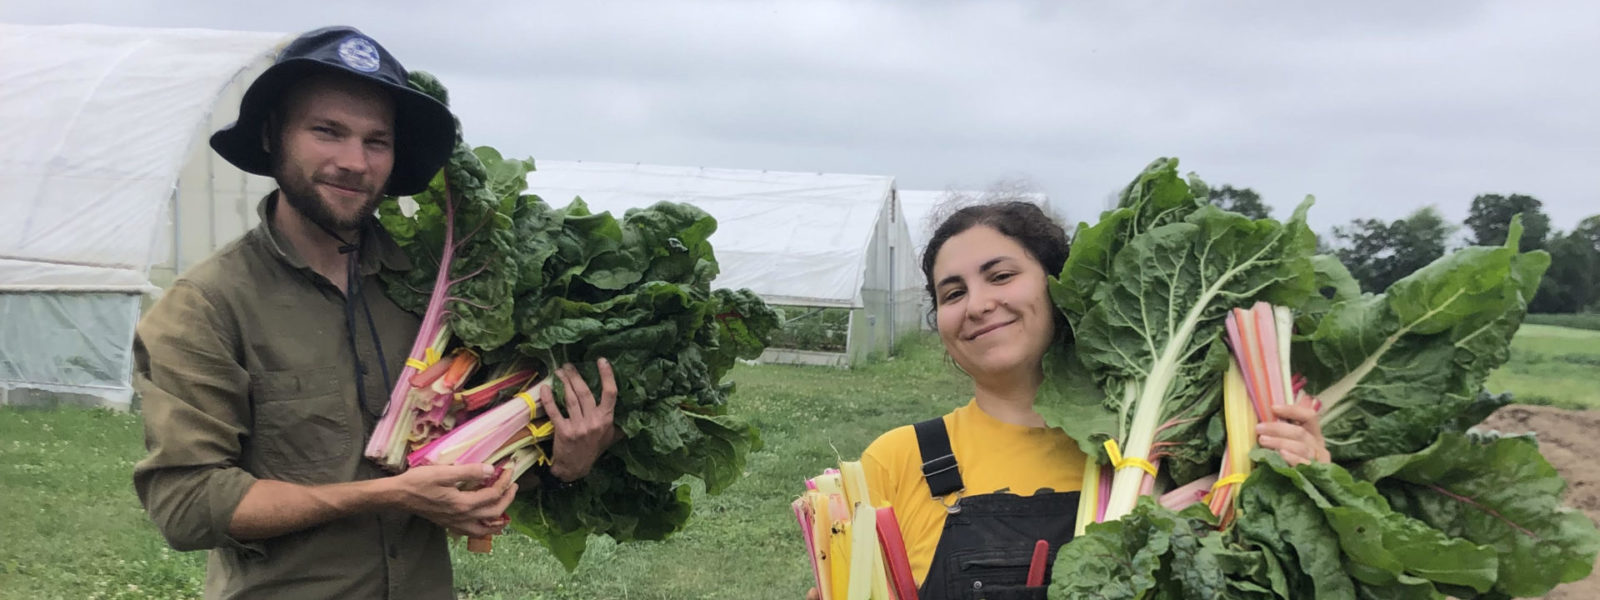 Two people holding armfuls of chard